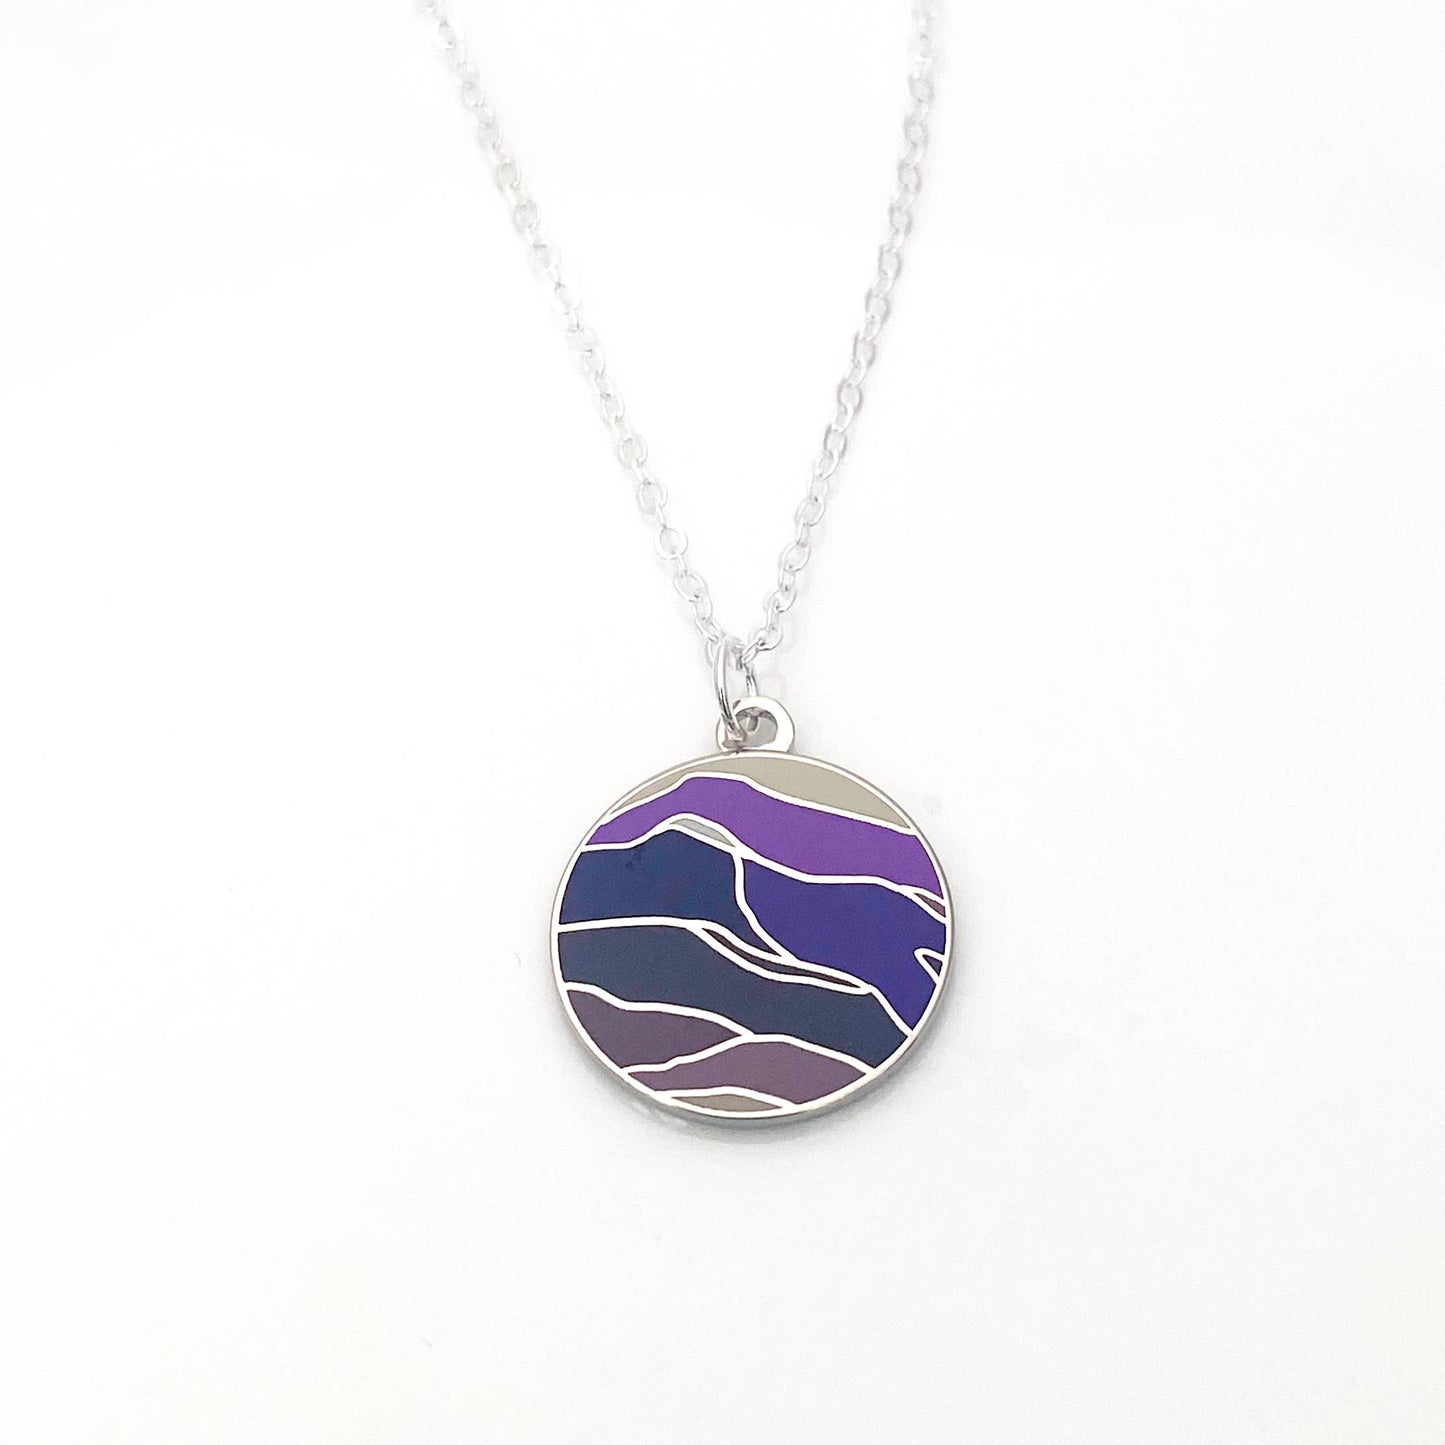 Round necklace with a waves of purple enamel